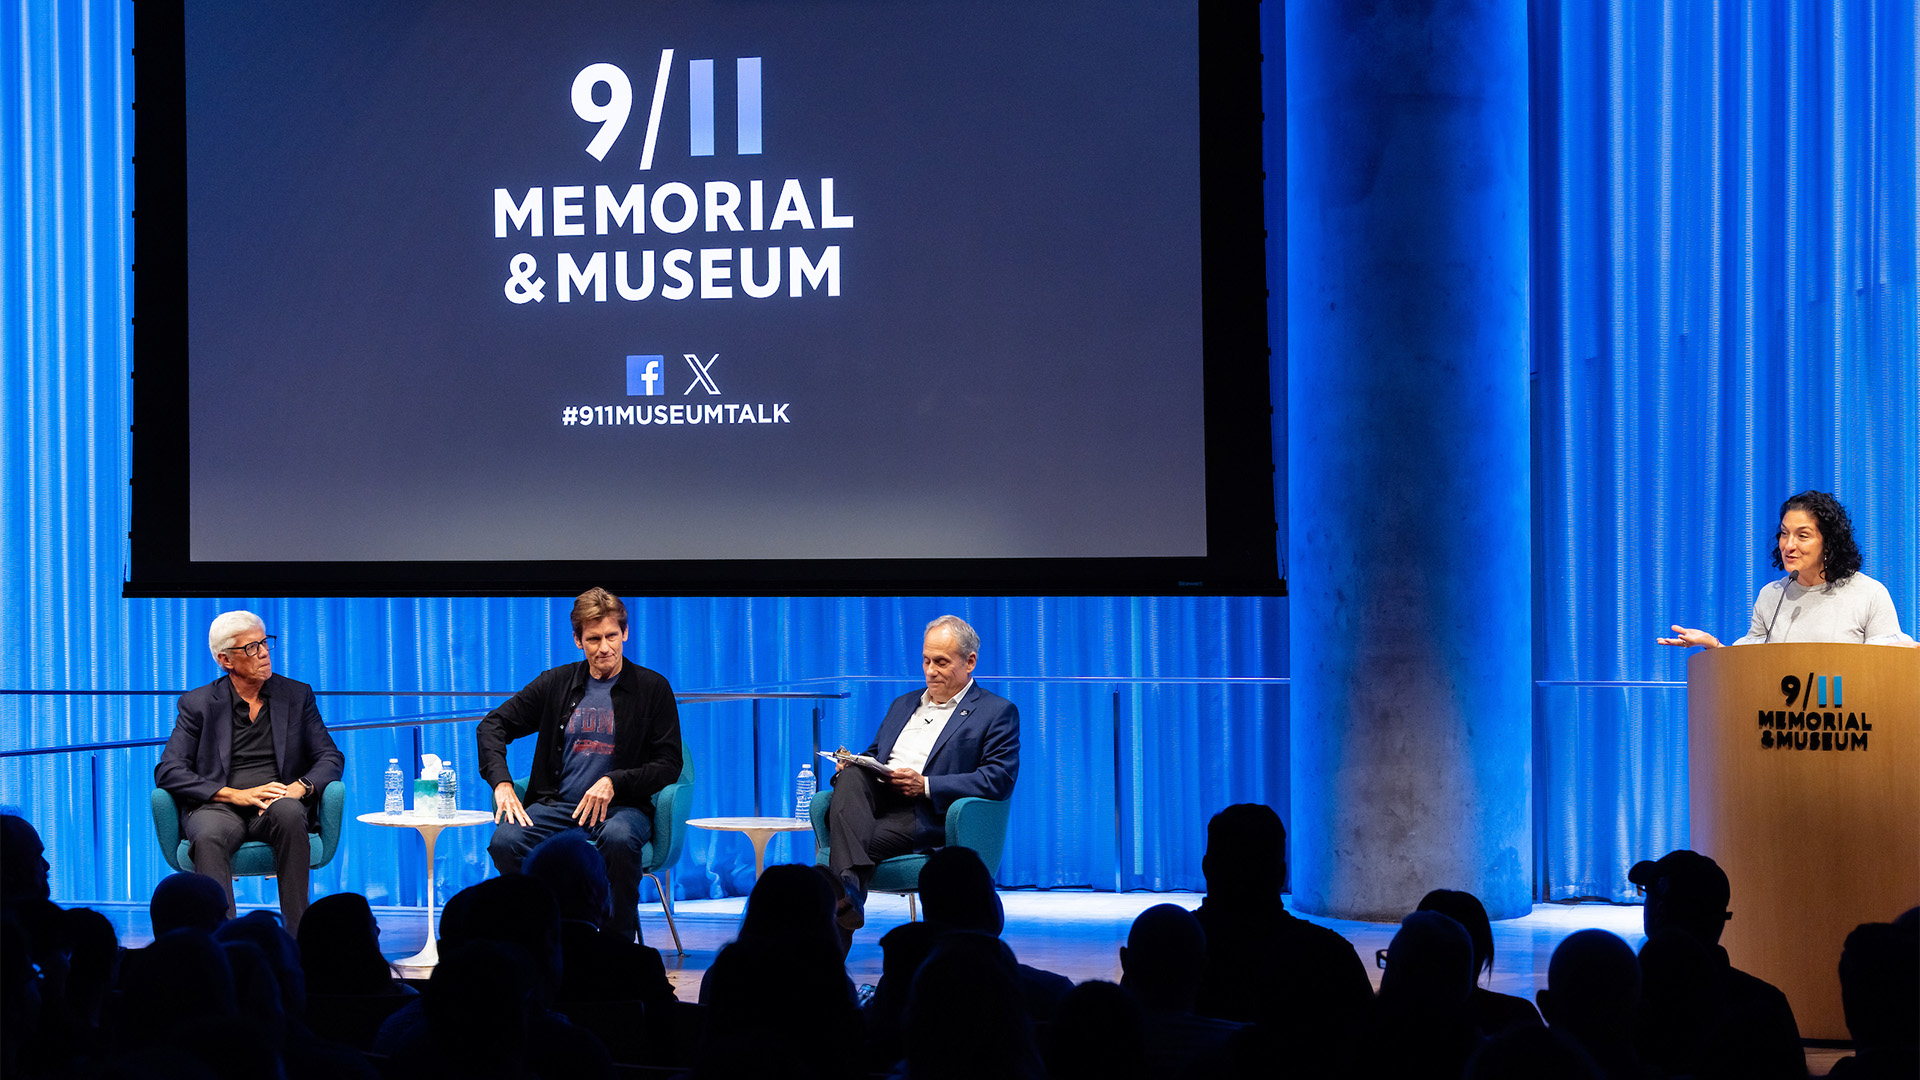 Peter Tolan (left) sitting on stage with Dennis Leary (center) and Museum Director Clifford Chanin (right)